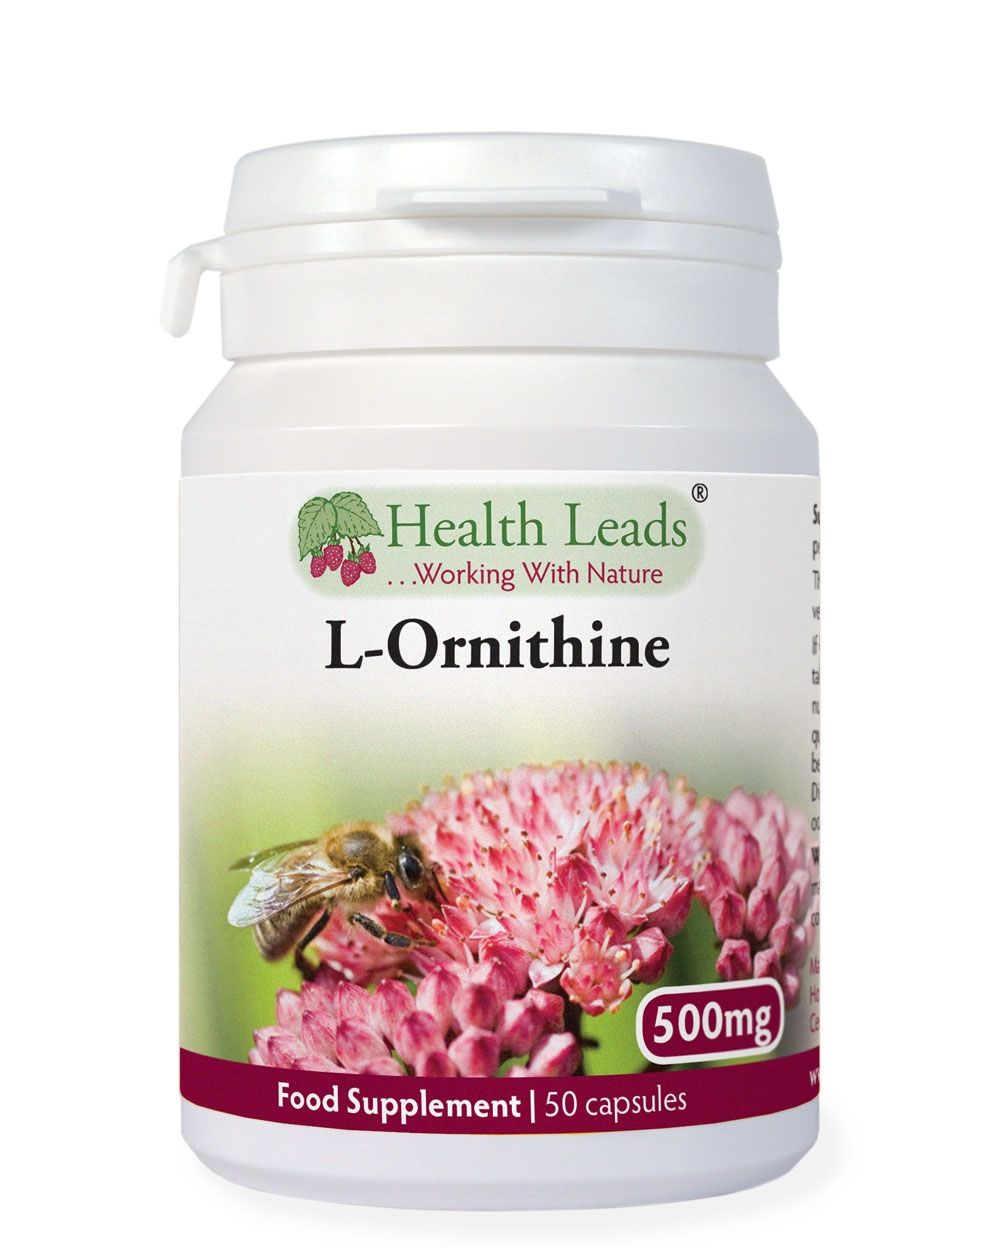 What is L-Ornithine